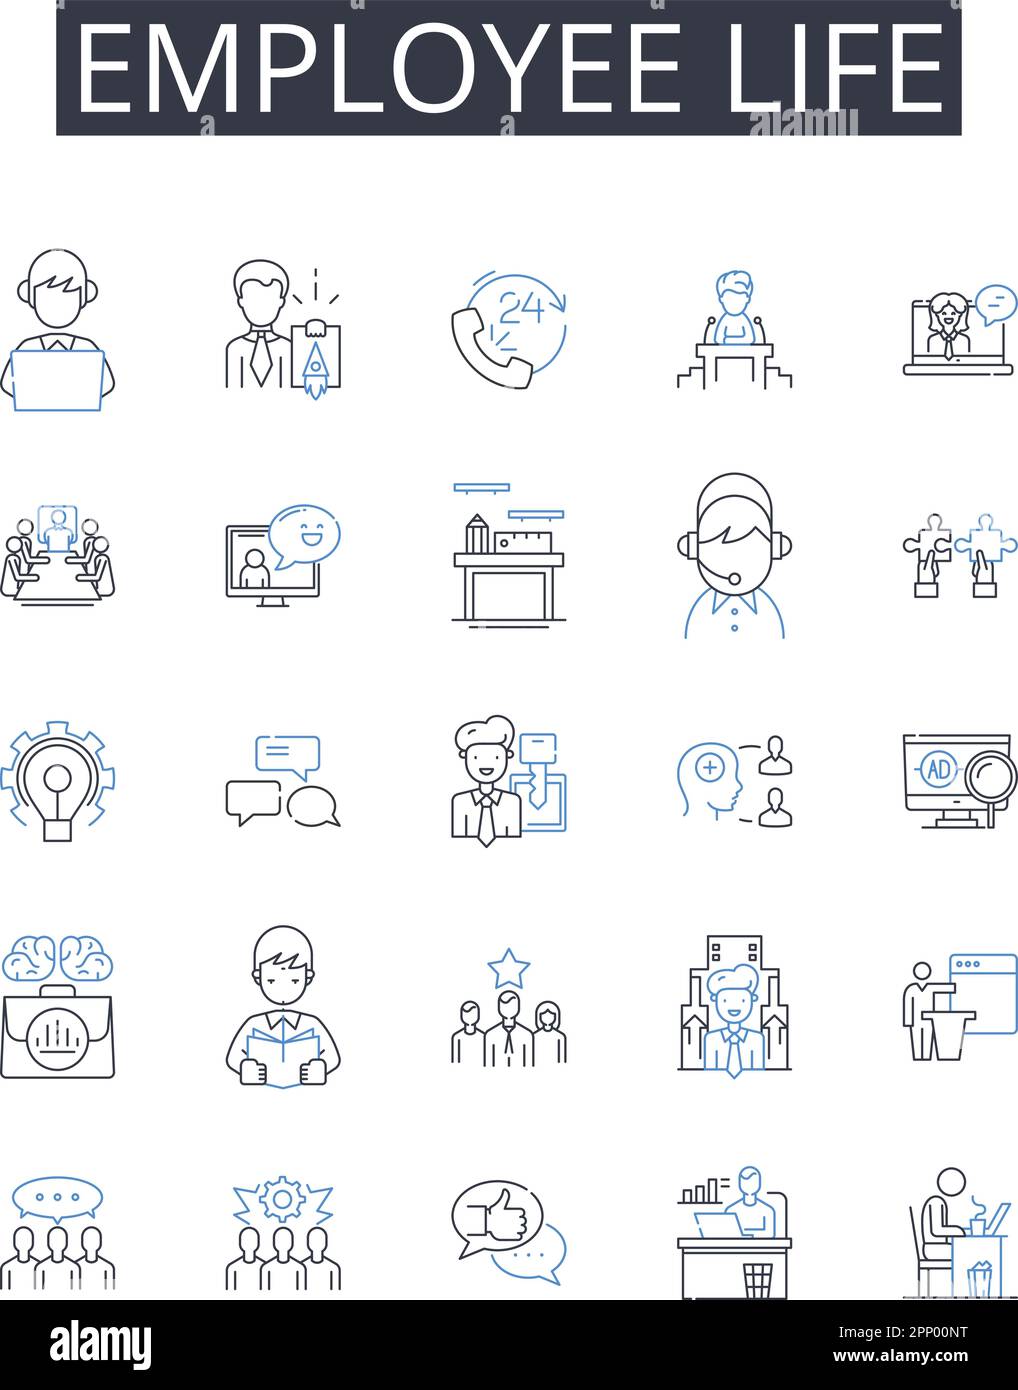 Employee life line icons collection. Job security, Workspace wellness, Career milests, Work culture, Staff relations, Labor conditions, Human capital Stock Vector